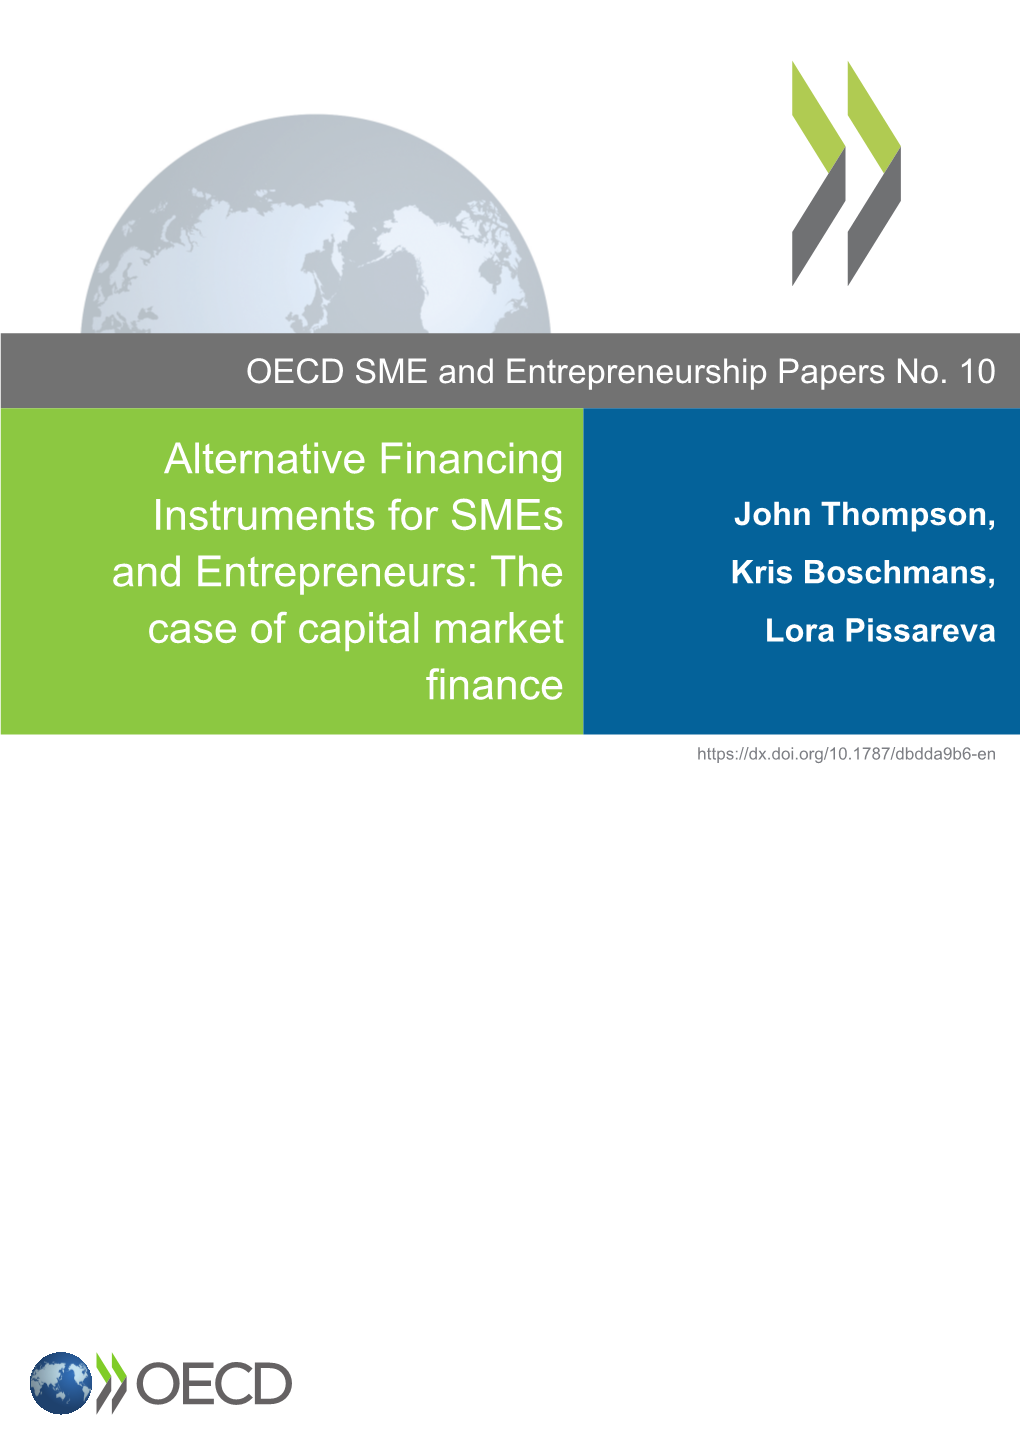 Alternative Financing Instruments for Smes and Entrepreneurs: the Case of Capital Market Finance